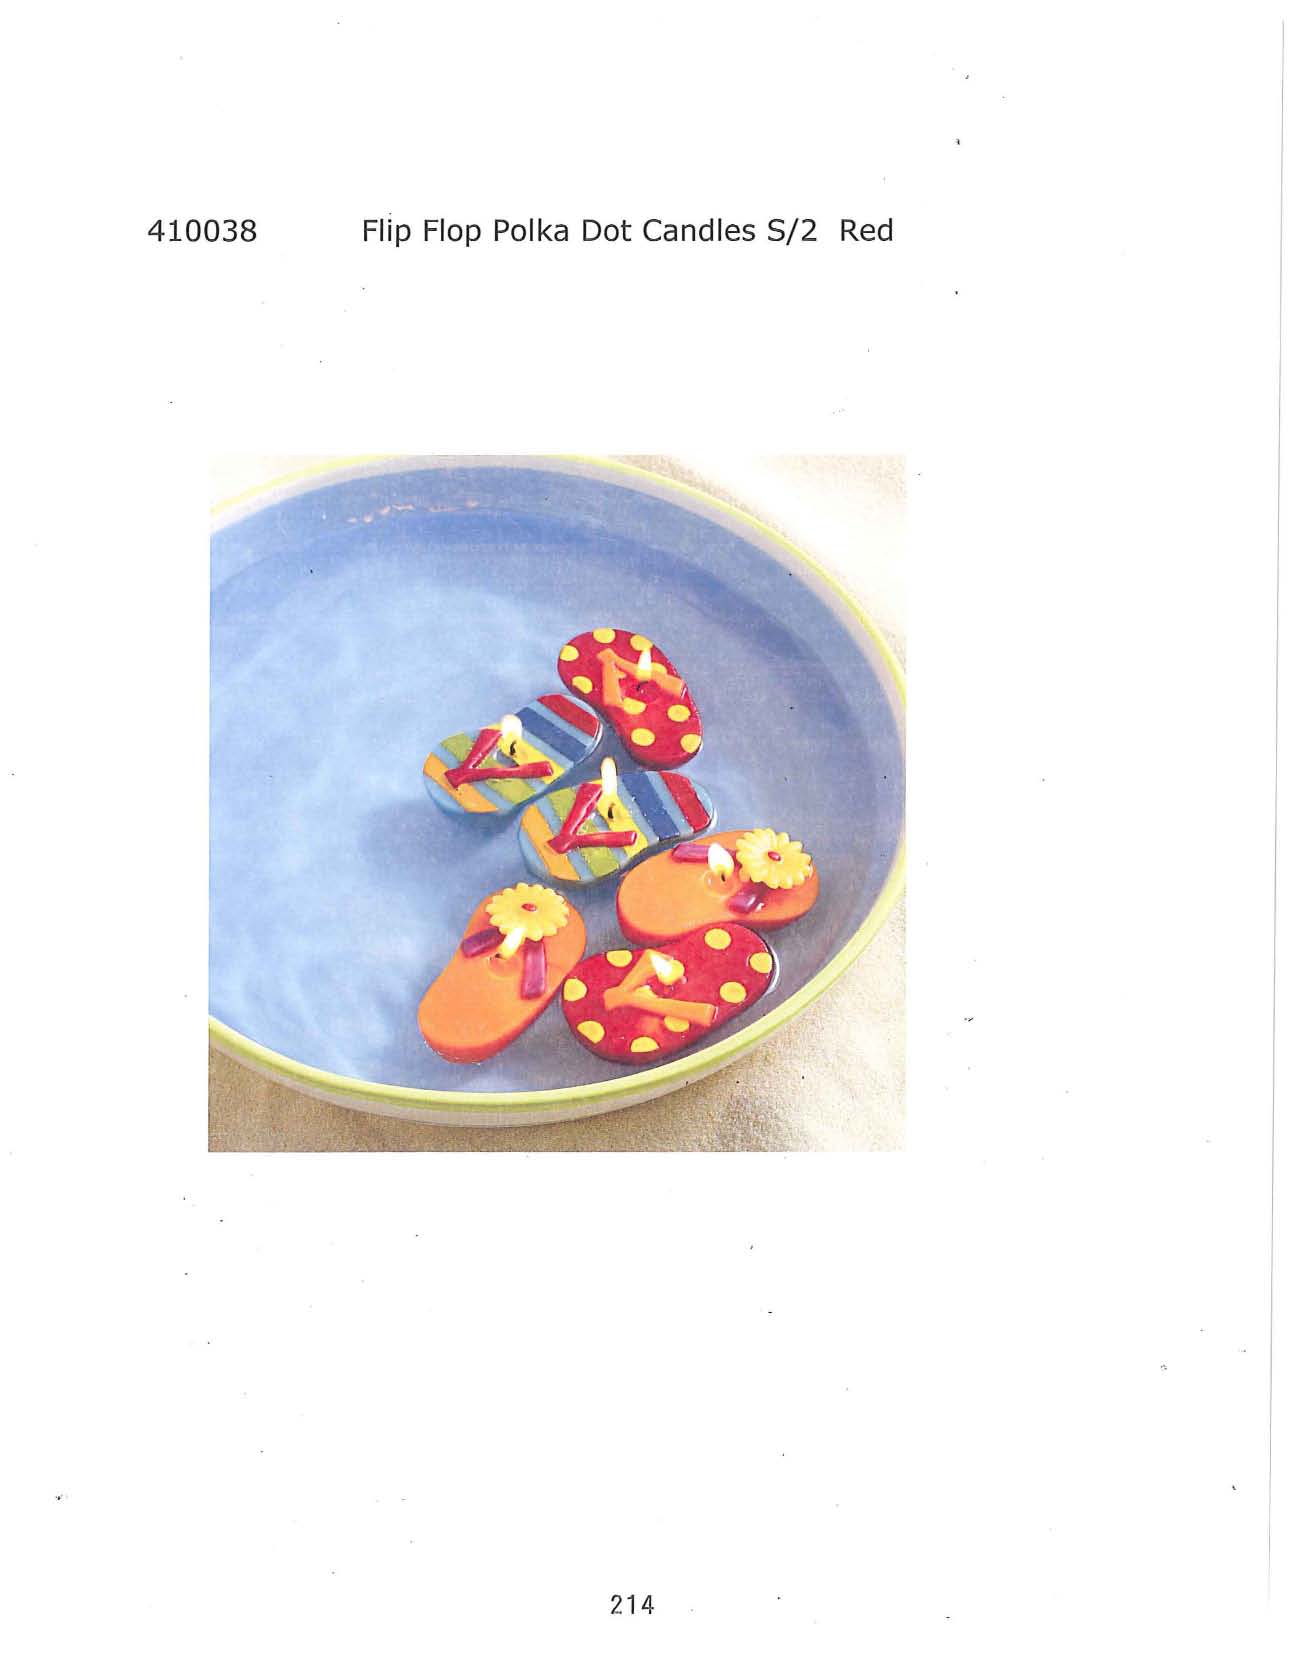 Flip Flop Polka Dot Candle s/2 - Red